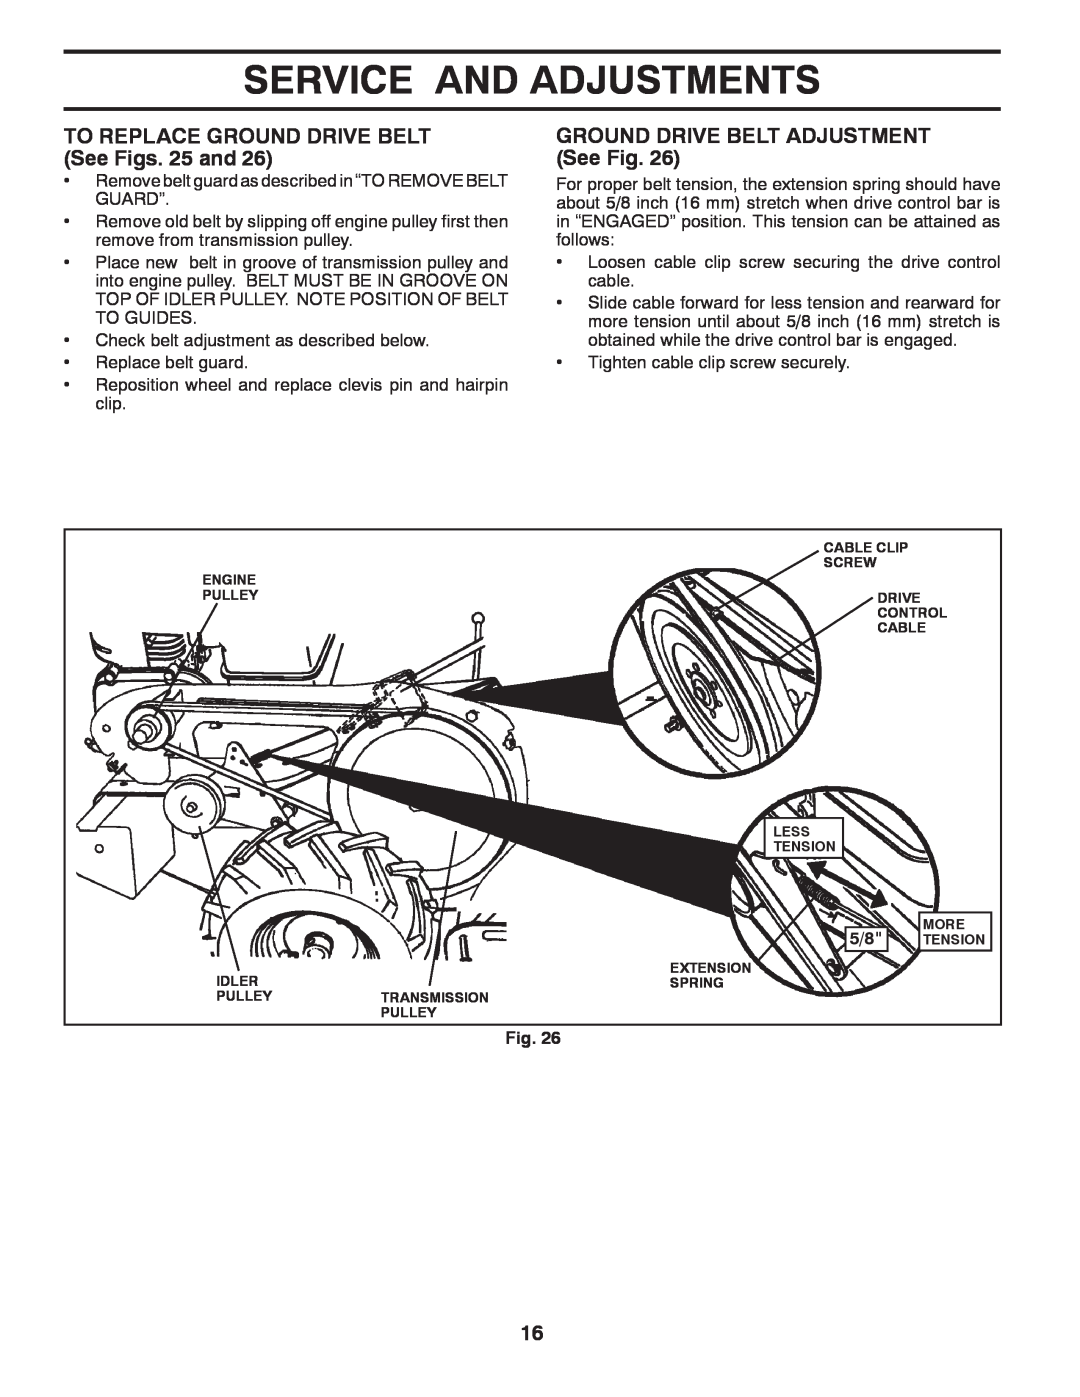 Poulan 433154 TO REPLACE GROUND DRIVE BELT See Figs. 25 and, GROUND DRIVE BELT ADJUSTMENT See Fig, Service And Adjustments 